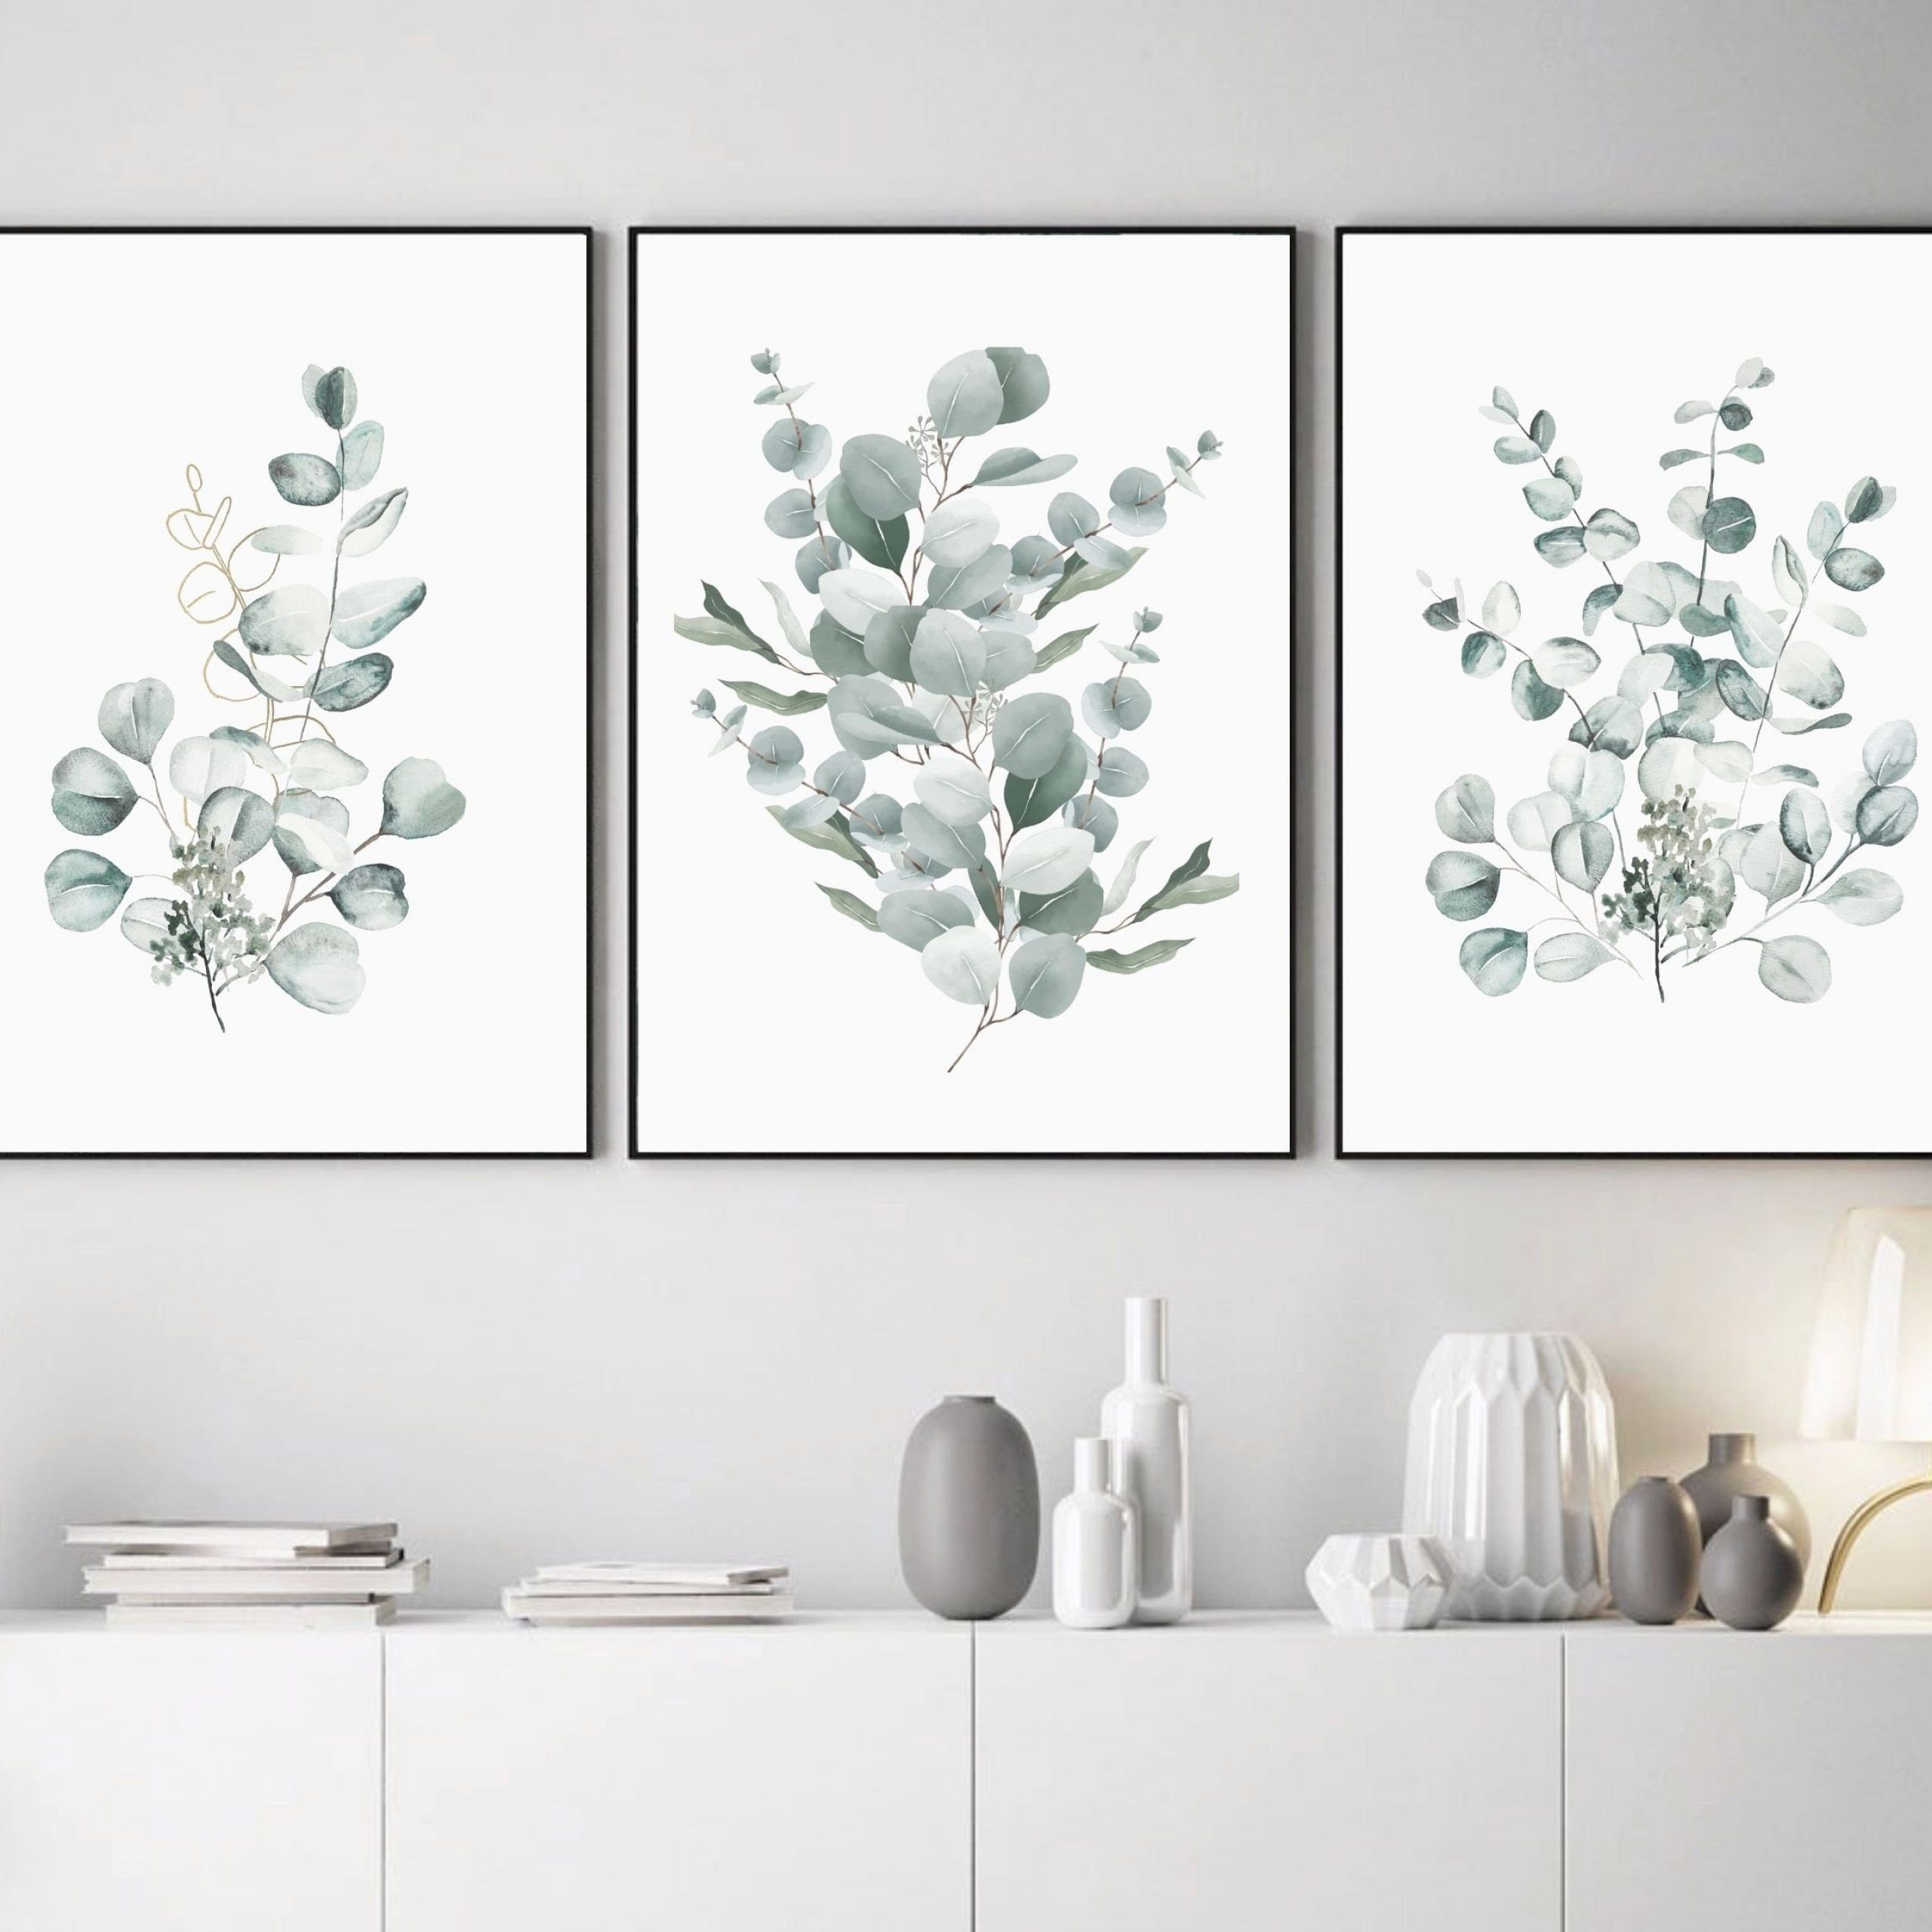 Eucalyptus Wall Art – Etsy For Best And Newest Eucalyptus Leaves Wall Art (View 13 of 20)